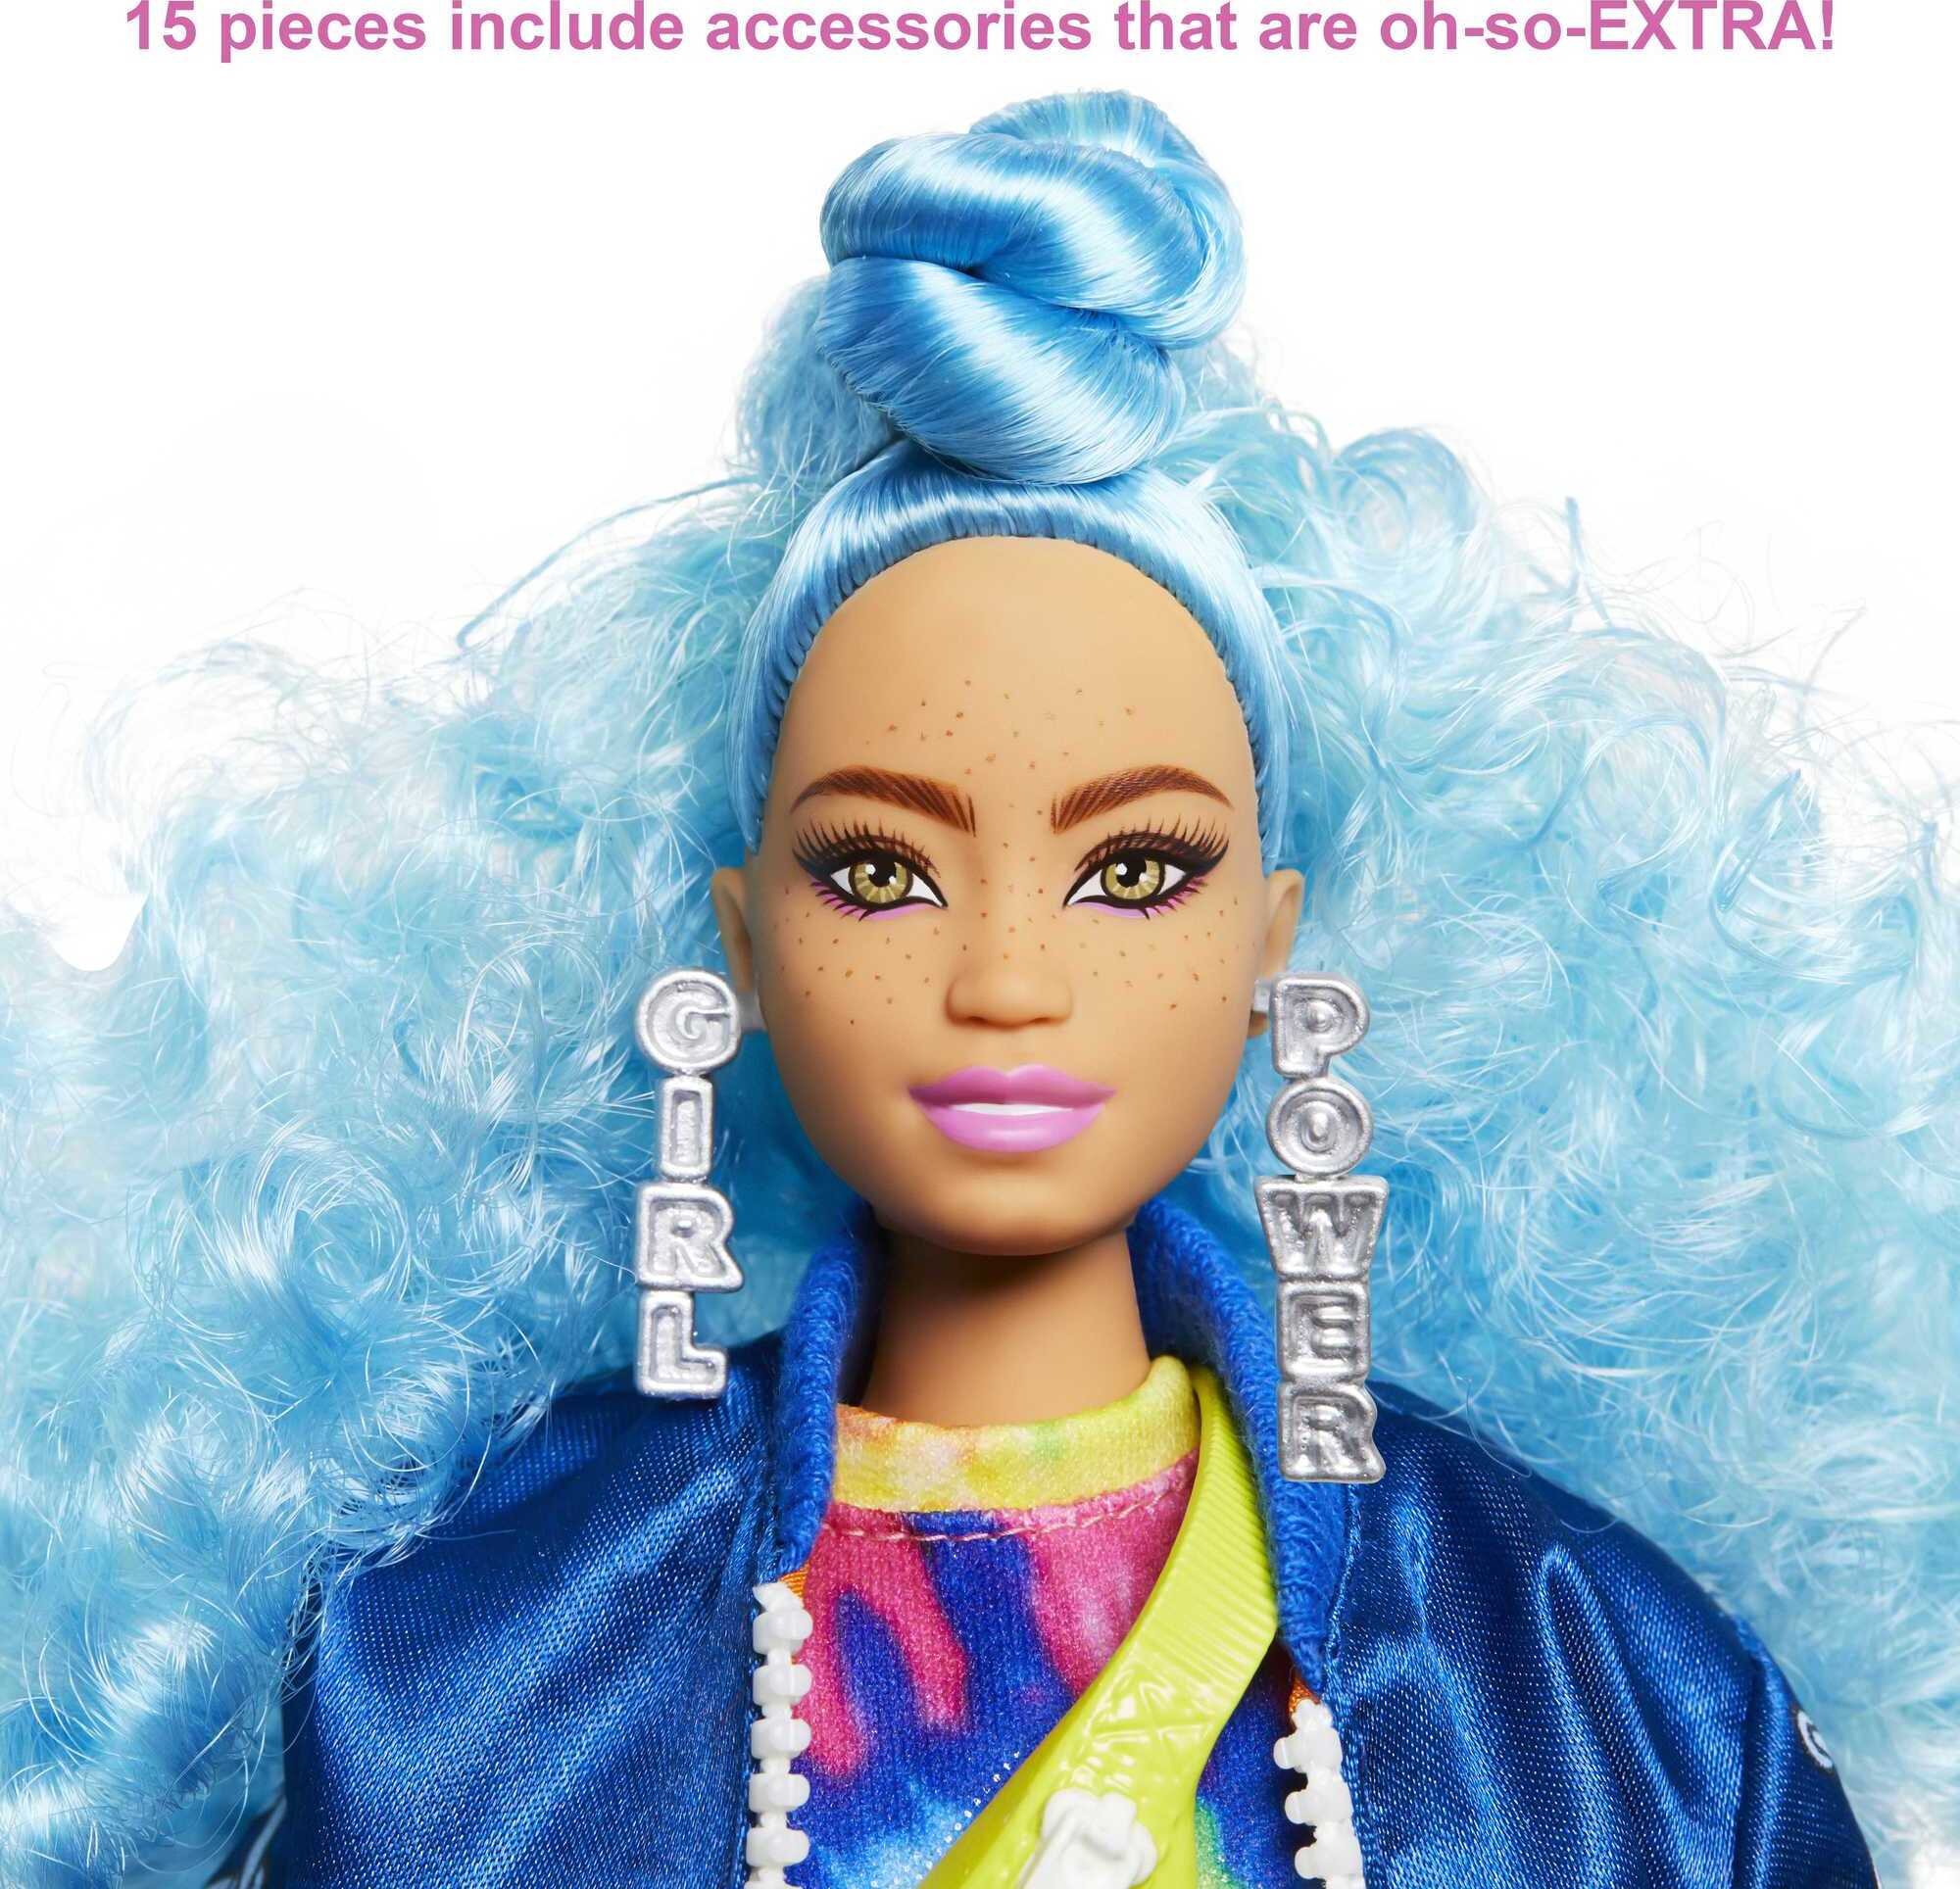 Barbie Extra Fashion Doll with Curvy Shape & Curly Blue Hair in Blue Jacket with Accessories & Pet - image 4 of 8